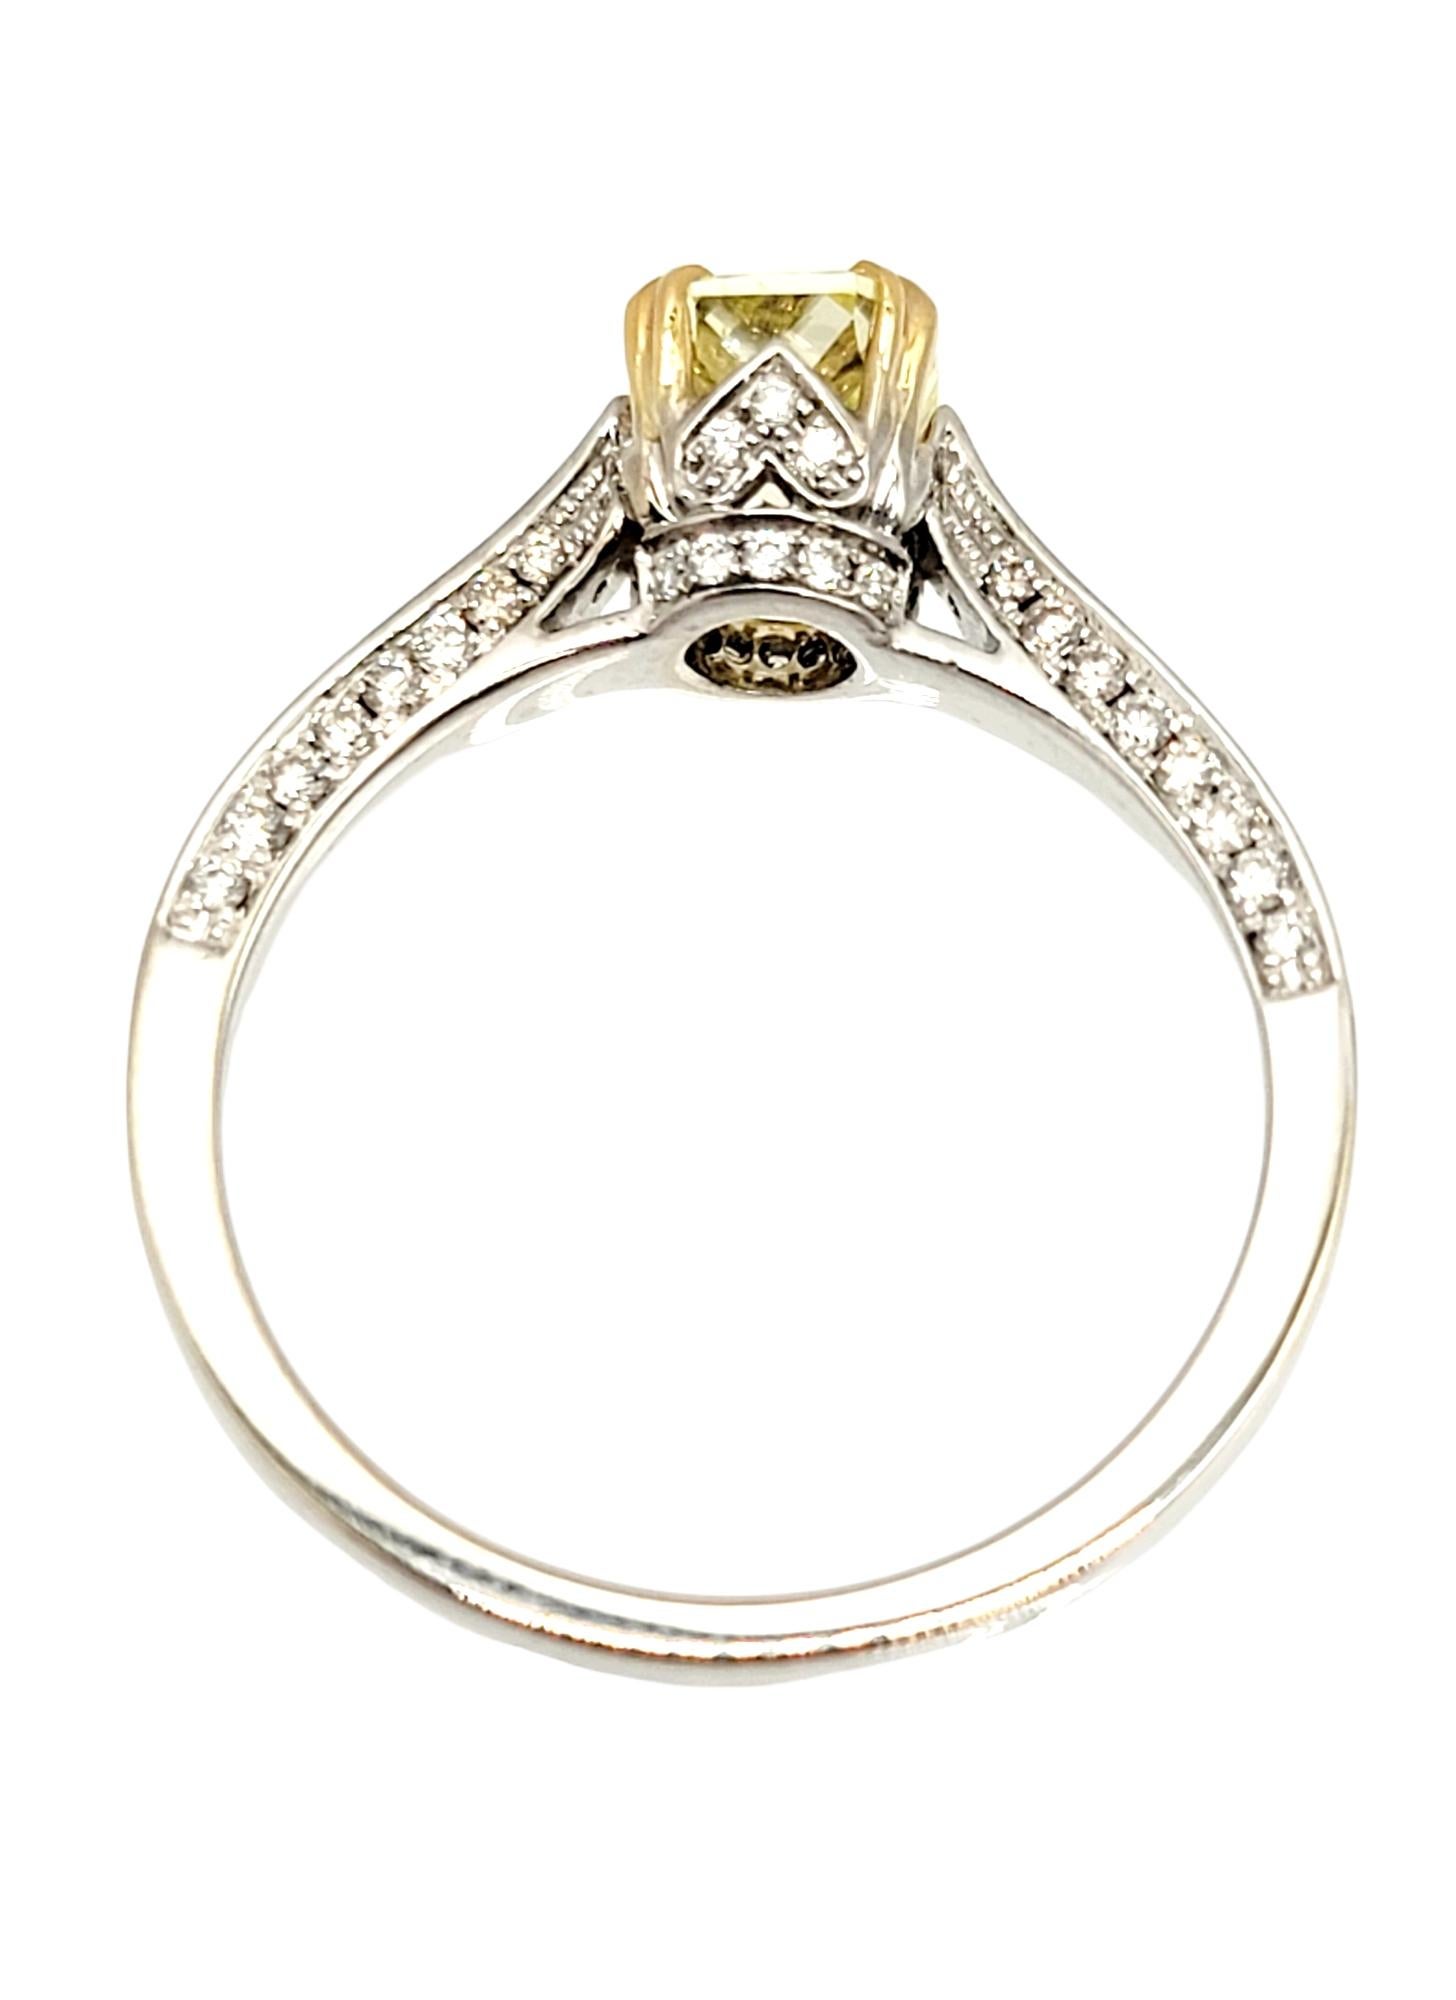 Radiant Cut Fancy Yellow Radiant Diamond Engagement Ring in White Gold For Sale 2